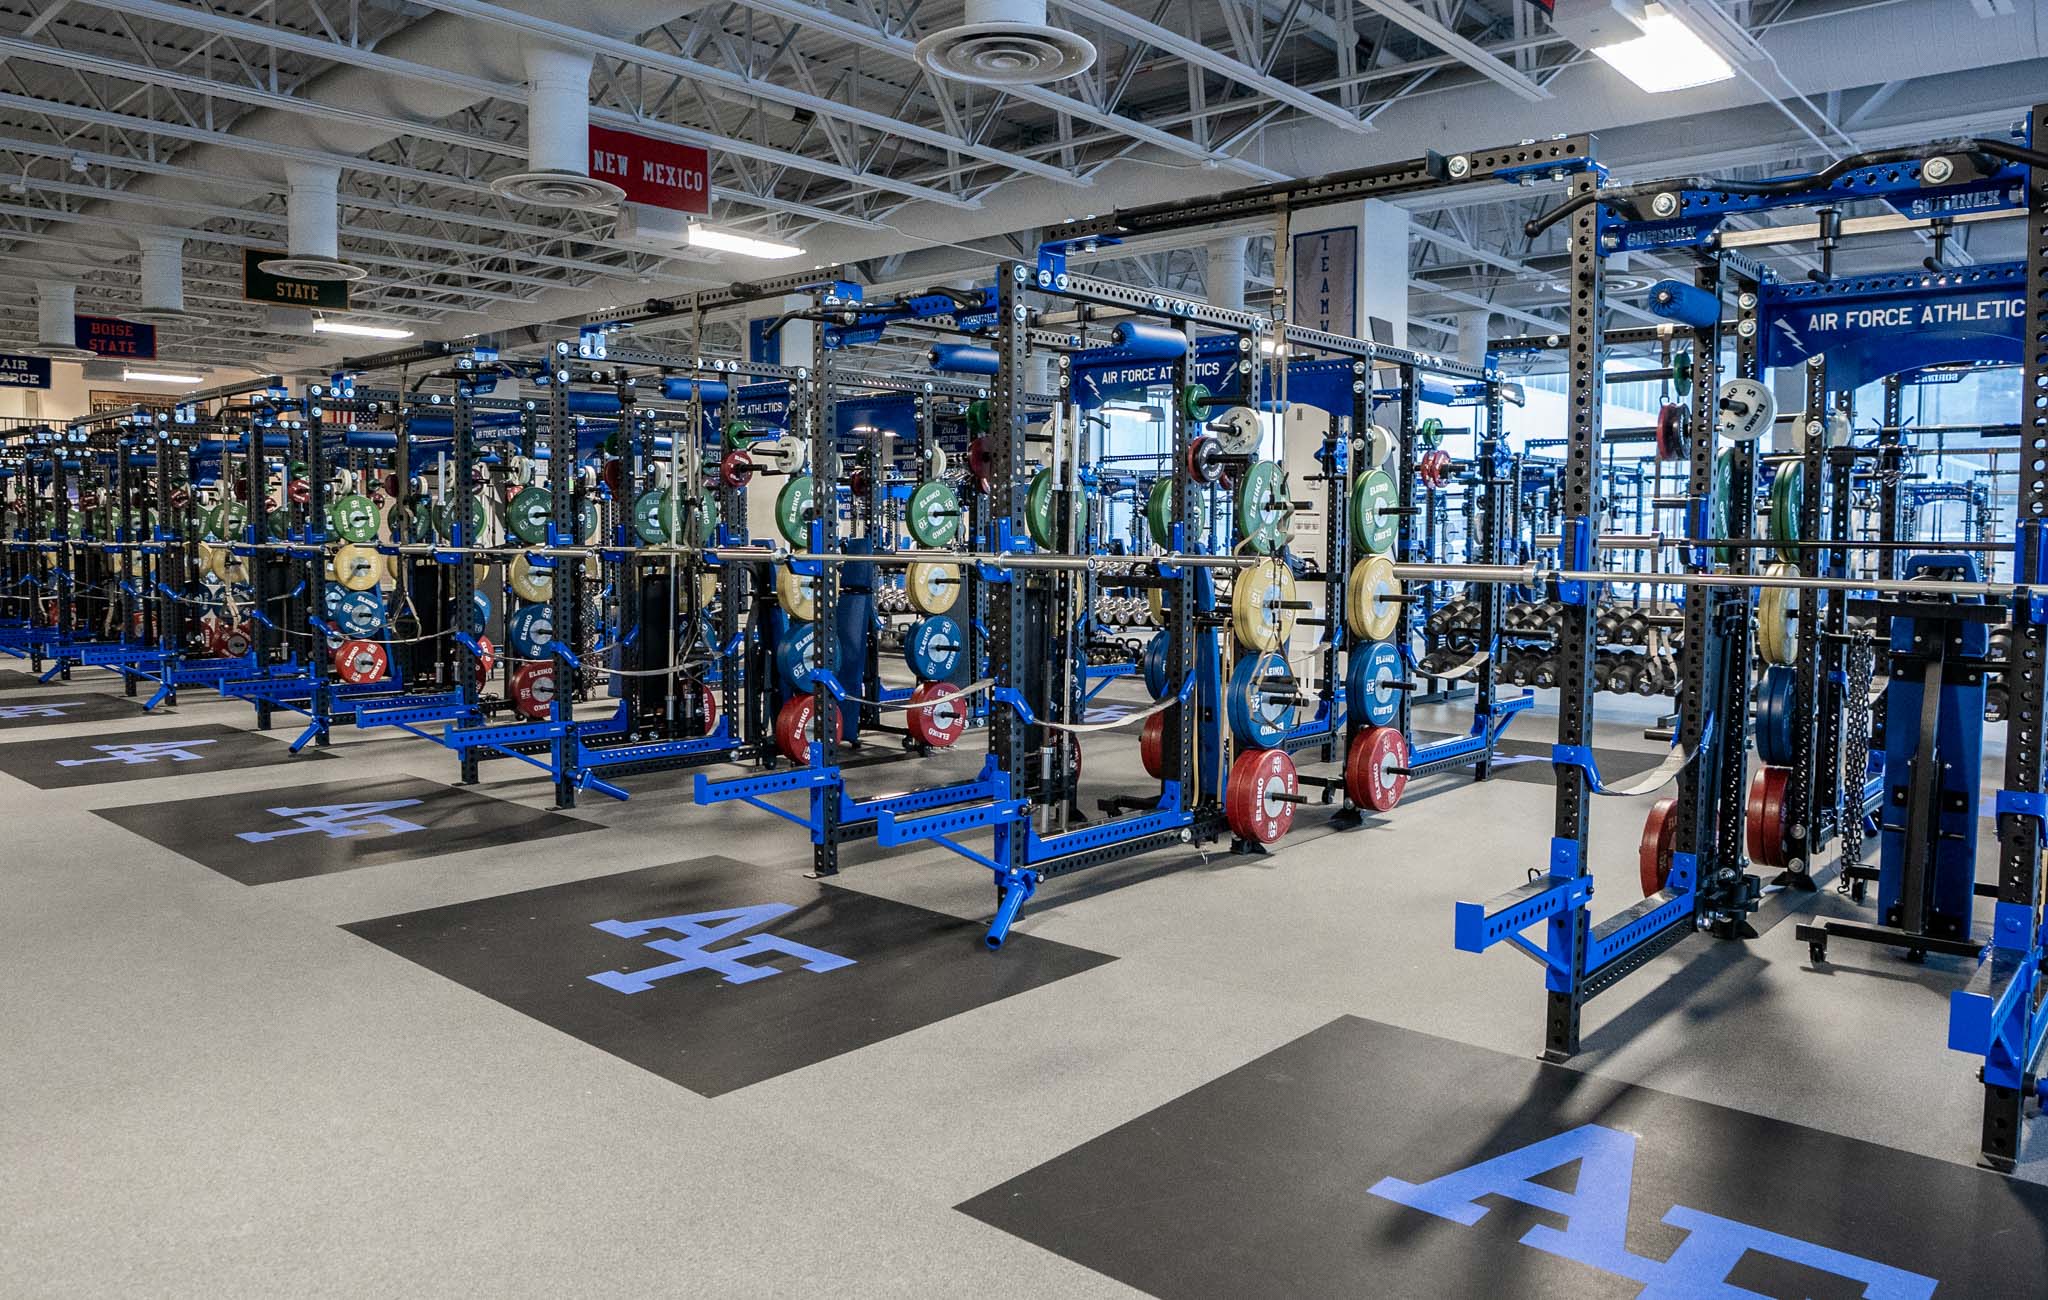 Air Force Academy Strength and Conditioning